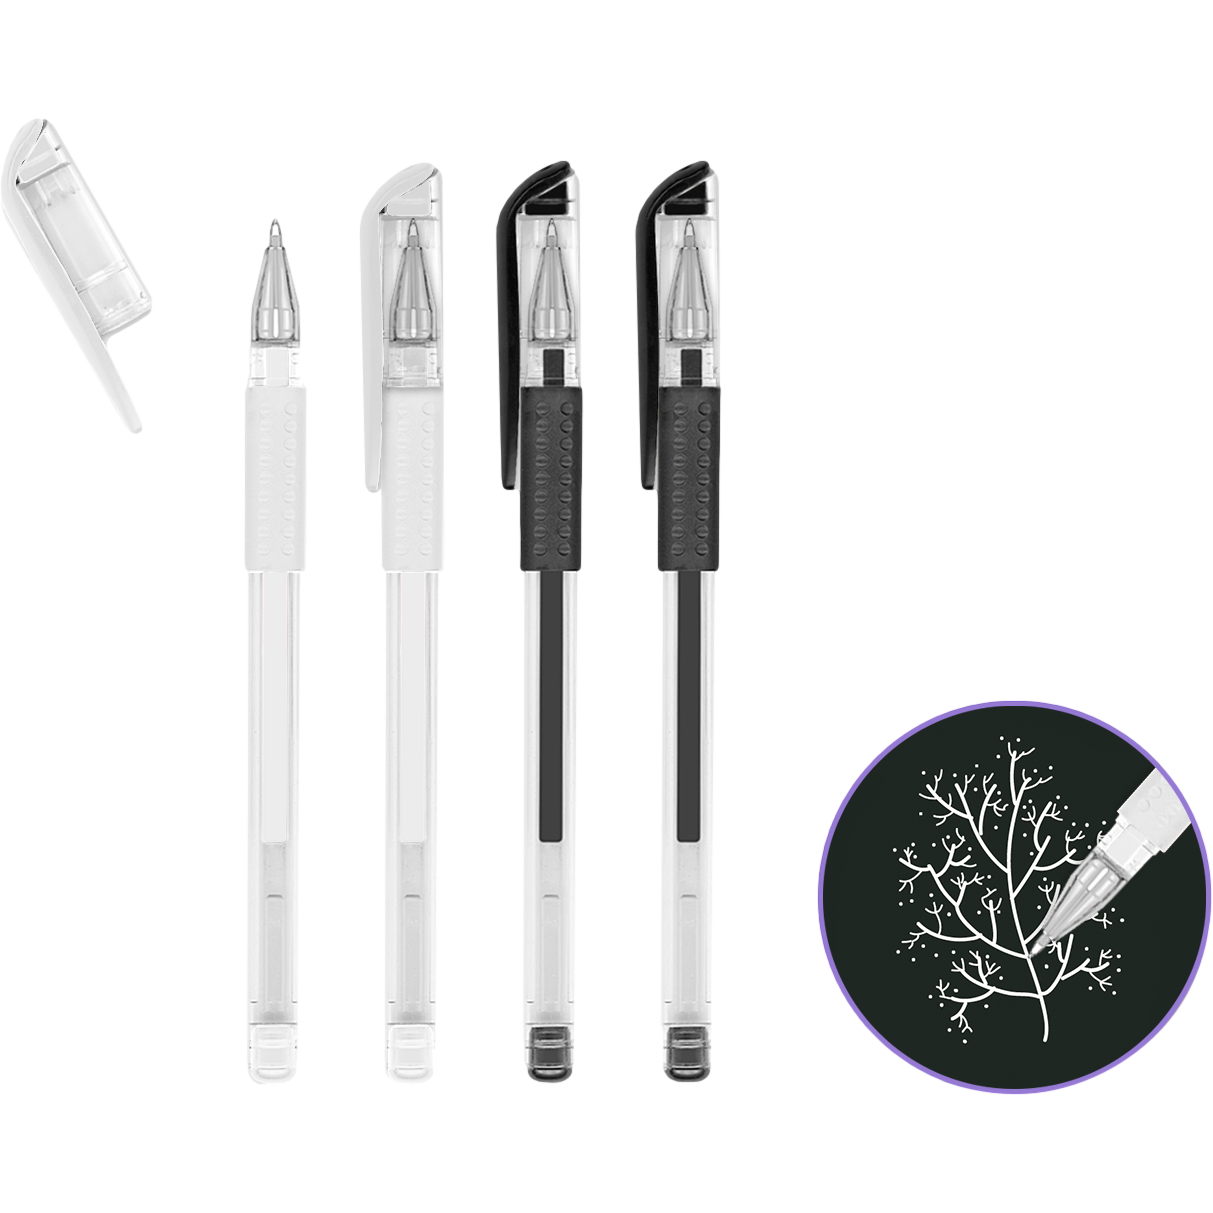 Get High-End products at Affordable Costs with our MultiCraft Scrapbook Gel  Pens: Acidfree and Photosafe-Black & White Mix (4 Pack) MultiCraft